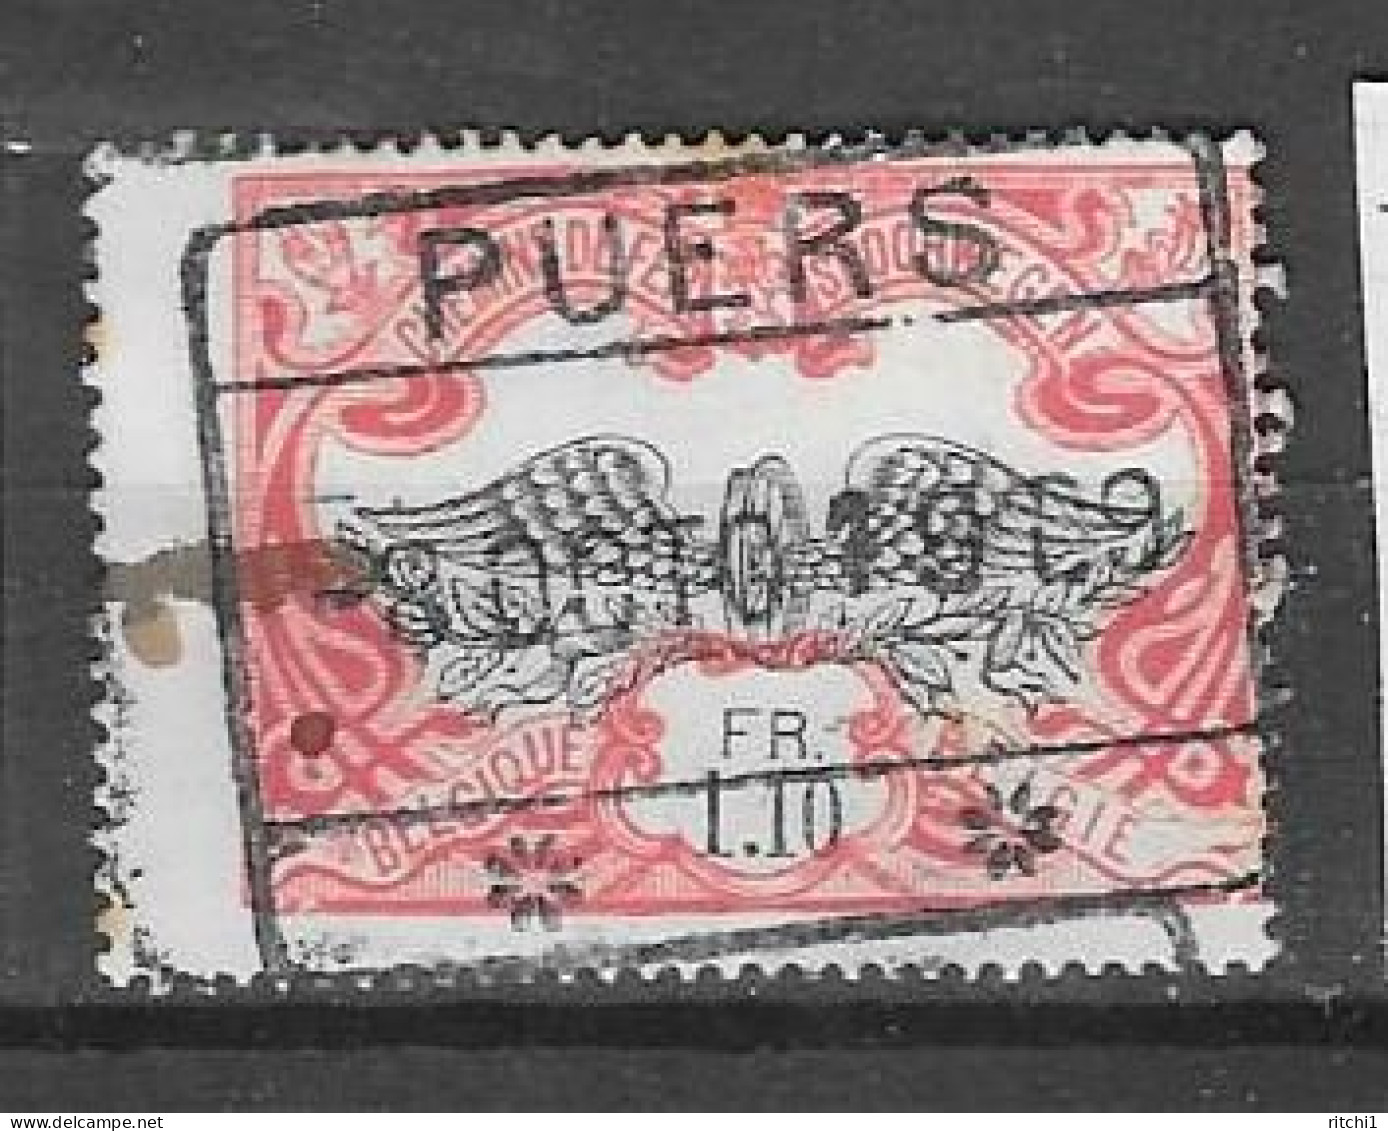 42 Puers *  * - Used